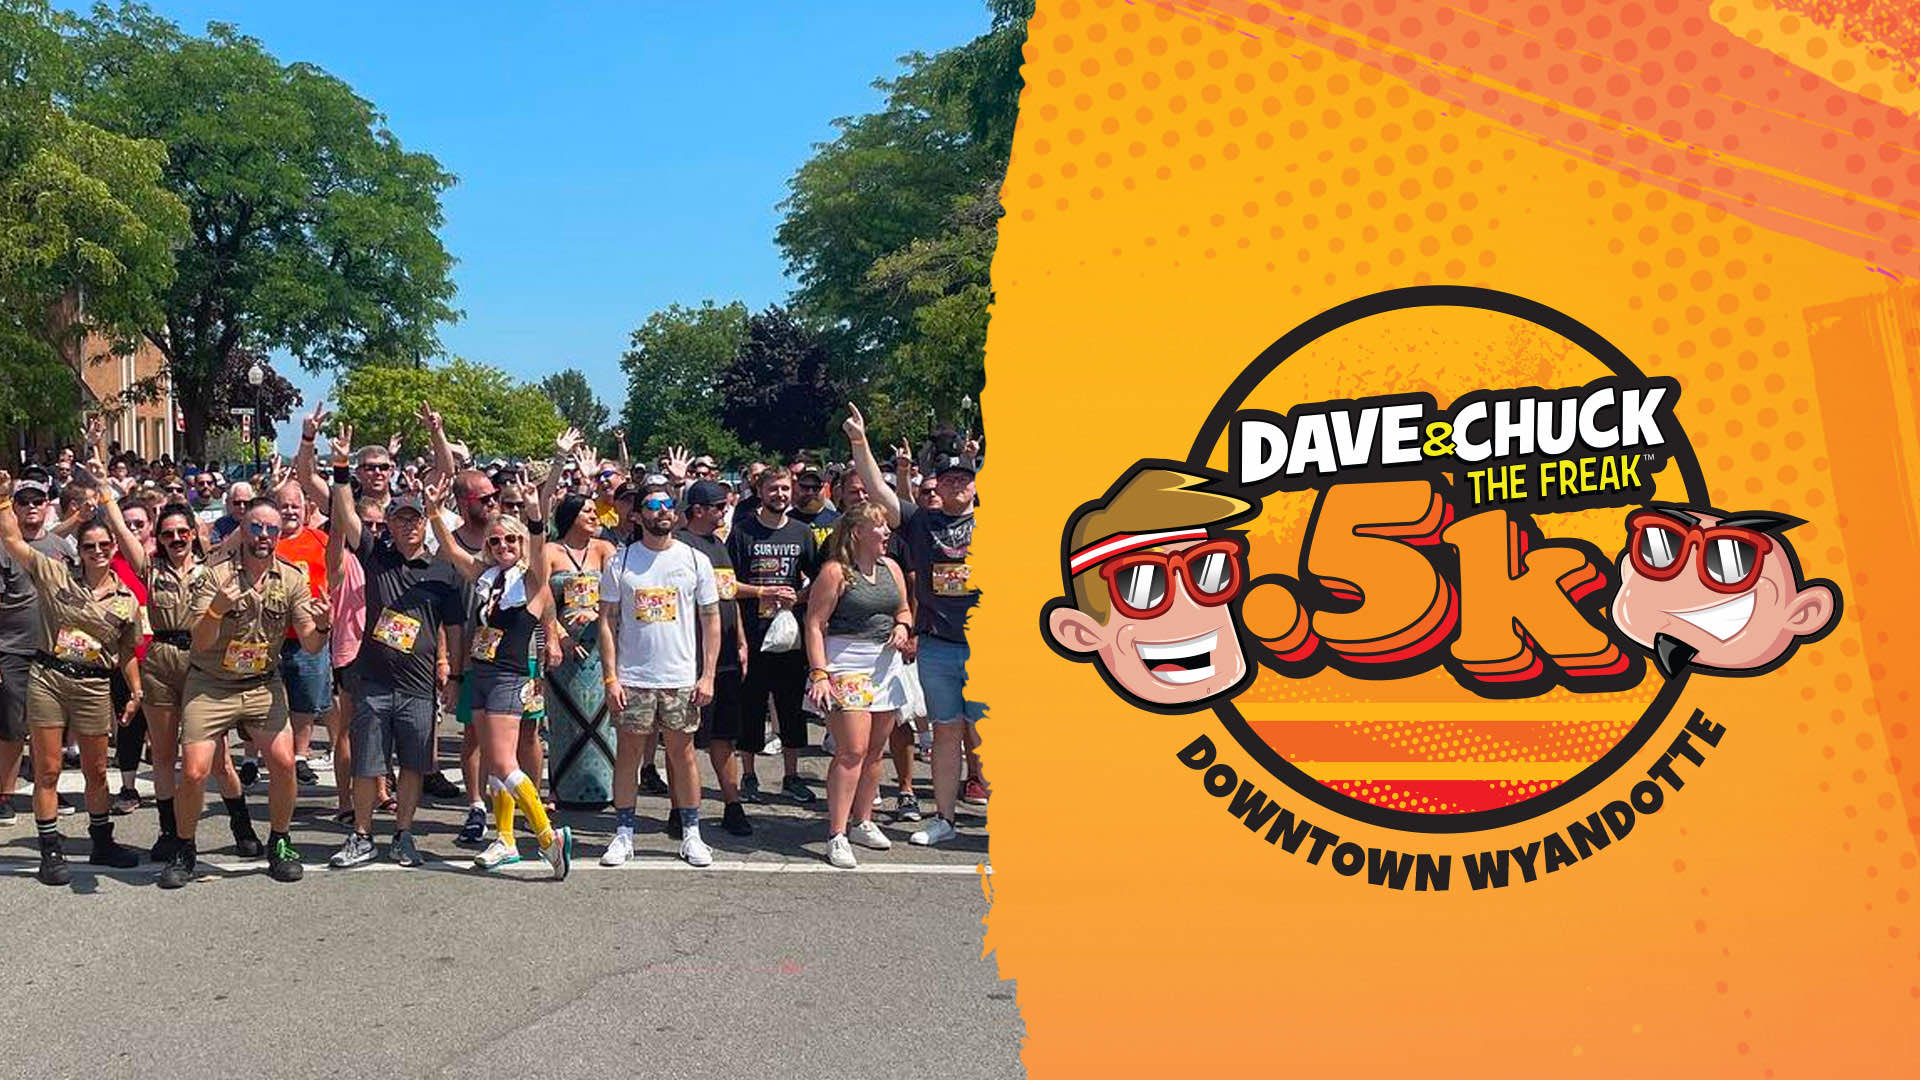 Dave & Chuck the Freak .5K in Downtown Wyandotte logo overlaying image of runners waiting at starting line